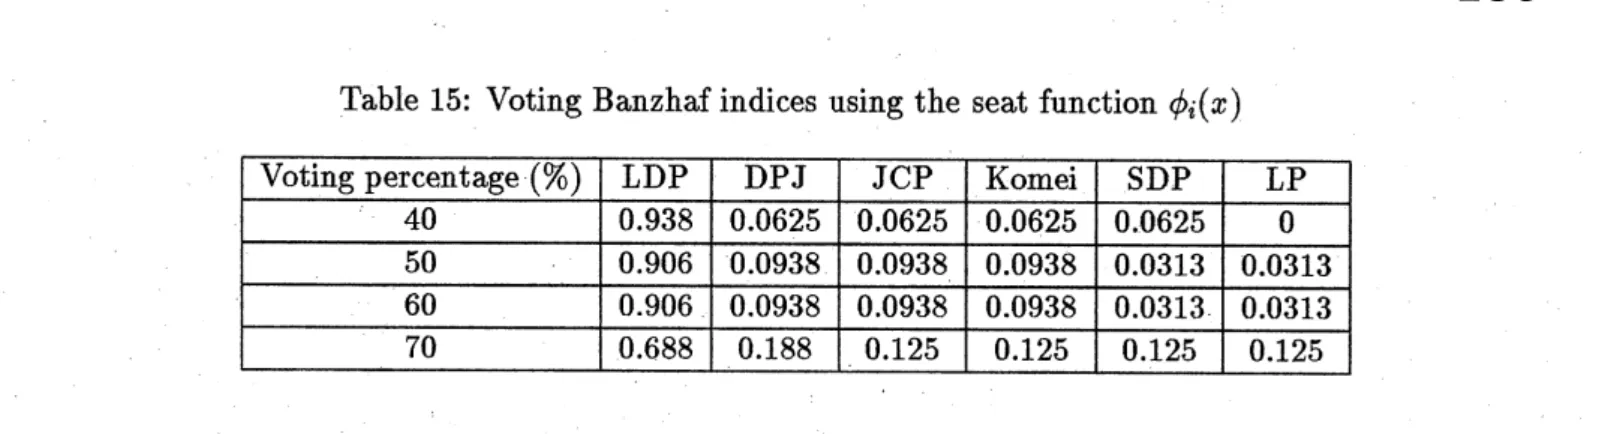 Table 15: Voting Banzhaf indices using the seat function $\phi_{i}(x)$